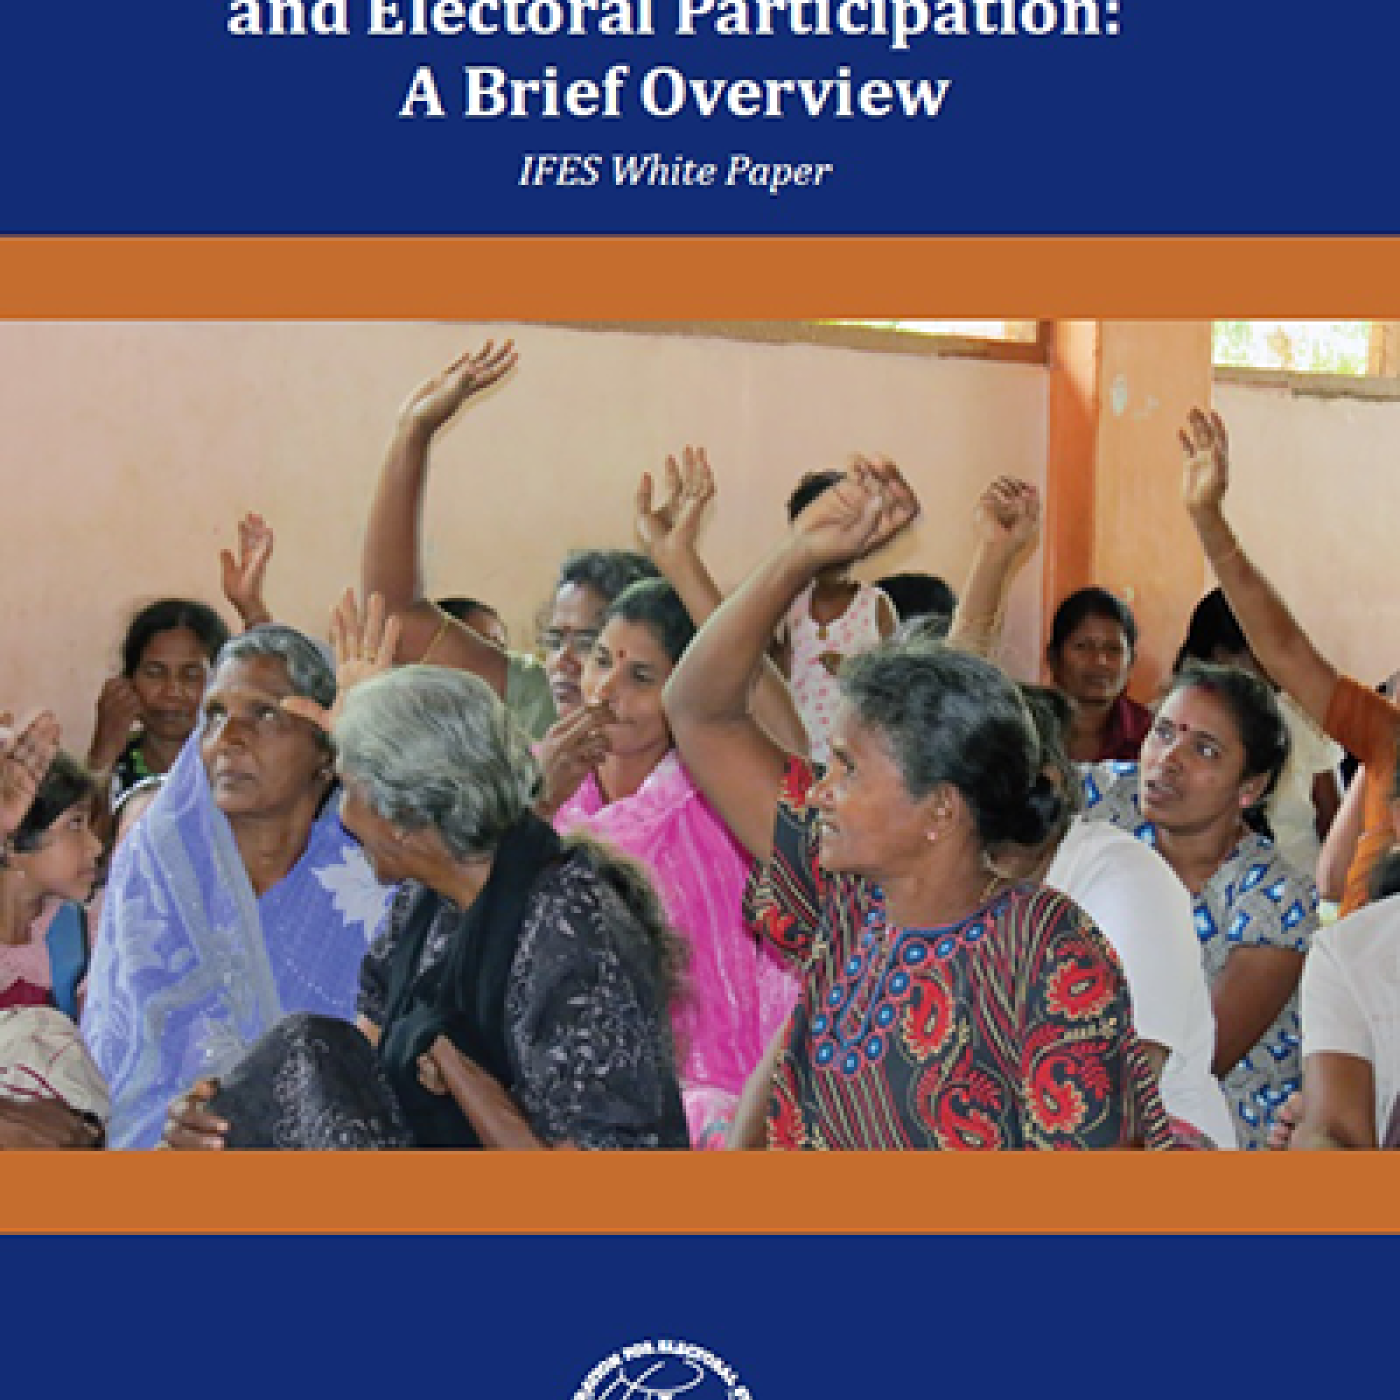 Cover of "Internally Displaced Persons and Electoral Participation: A Brief Overview"